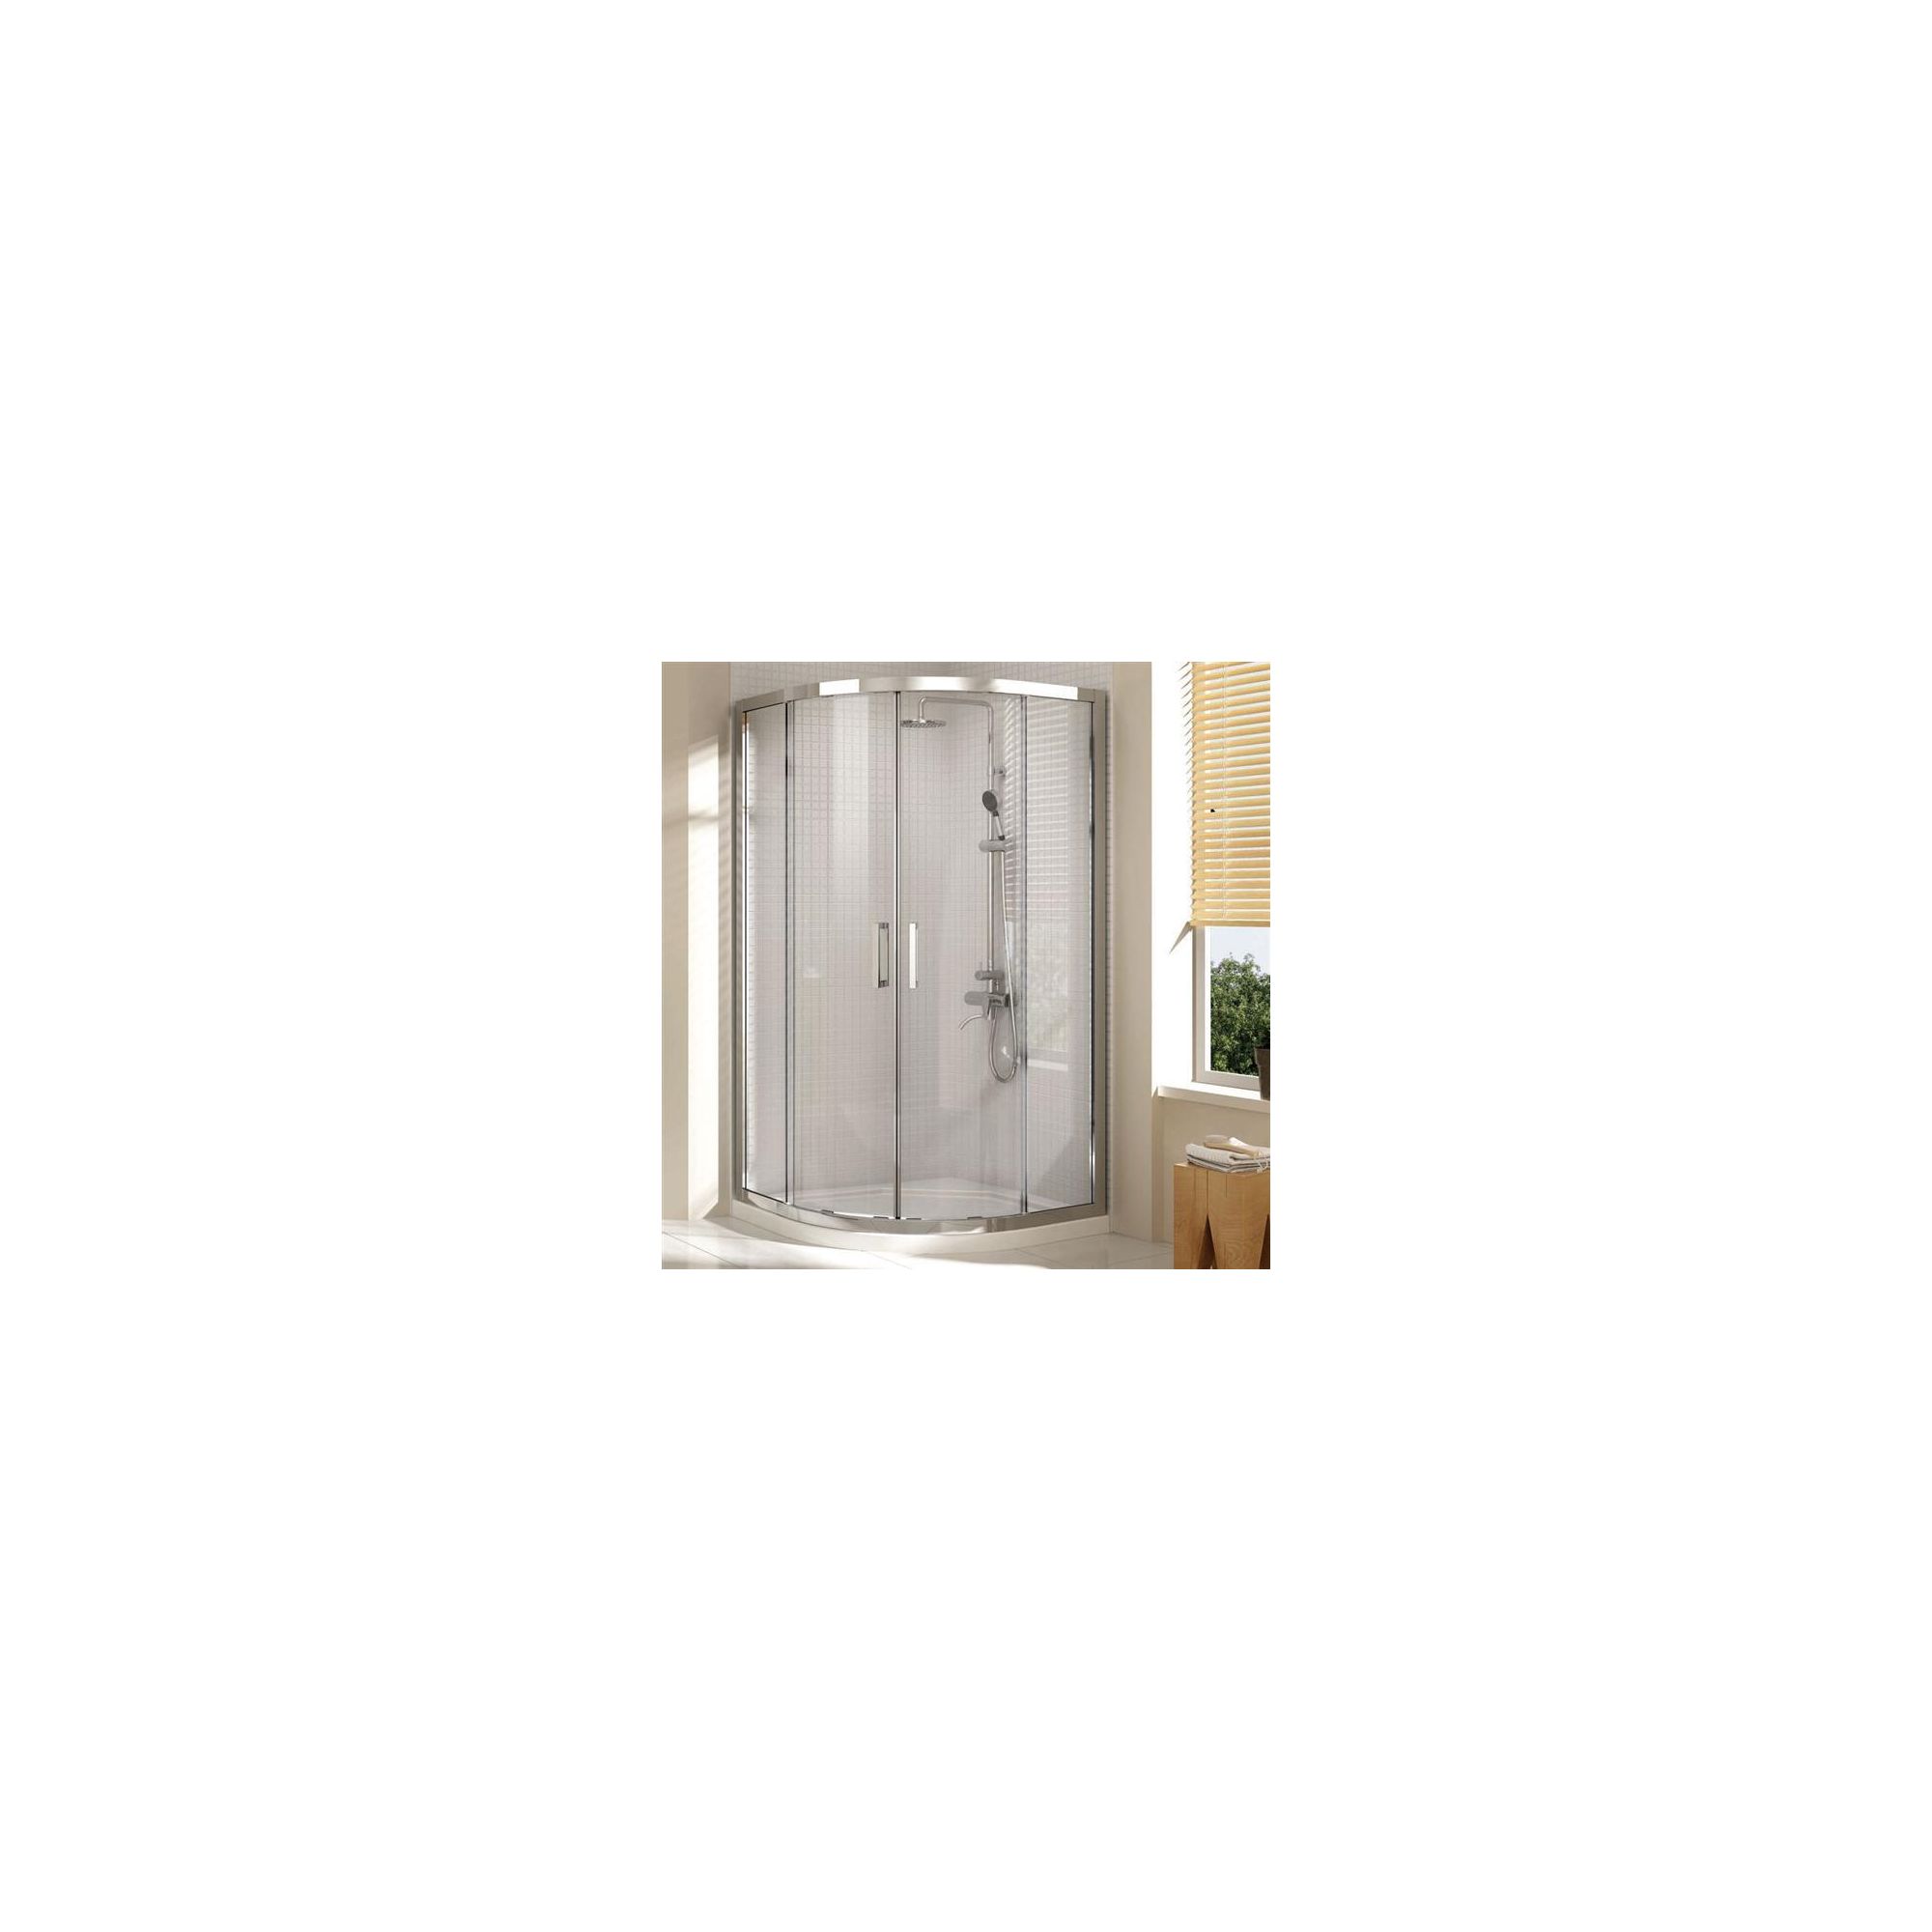 Merlyn Vivid Eight Quadrant Shower Enclosure, 800mm x 800mm, Low Profile Tray, 8mm Glass at Tesco Direct